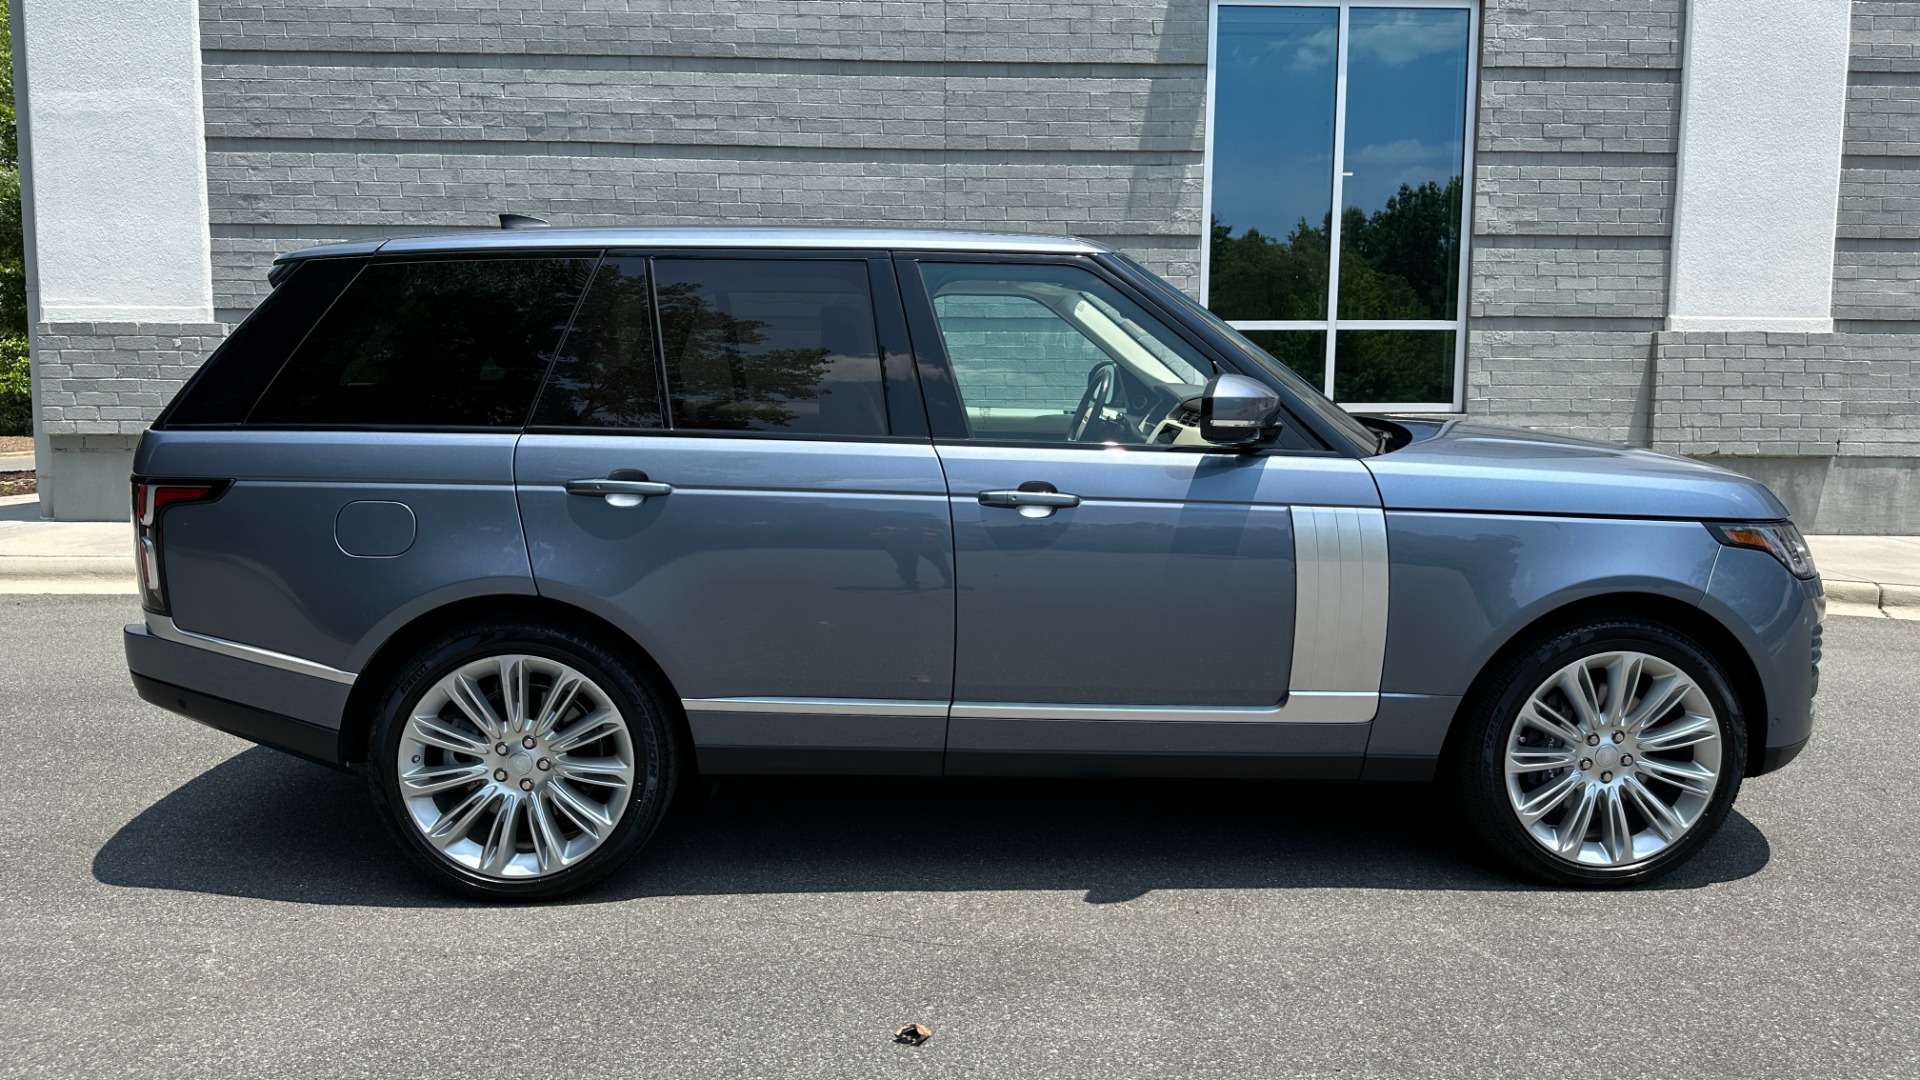 Used 2019 Land Rover Range Rover SUPERCHARGED / 22IN WHEELS / MERIDIAN SOUND / ATLAS ACCENTS for sale $69,100 at Formula Imports in Charlotte NC 28227 3